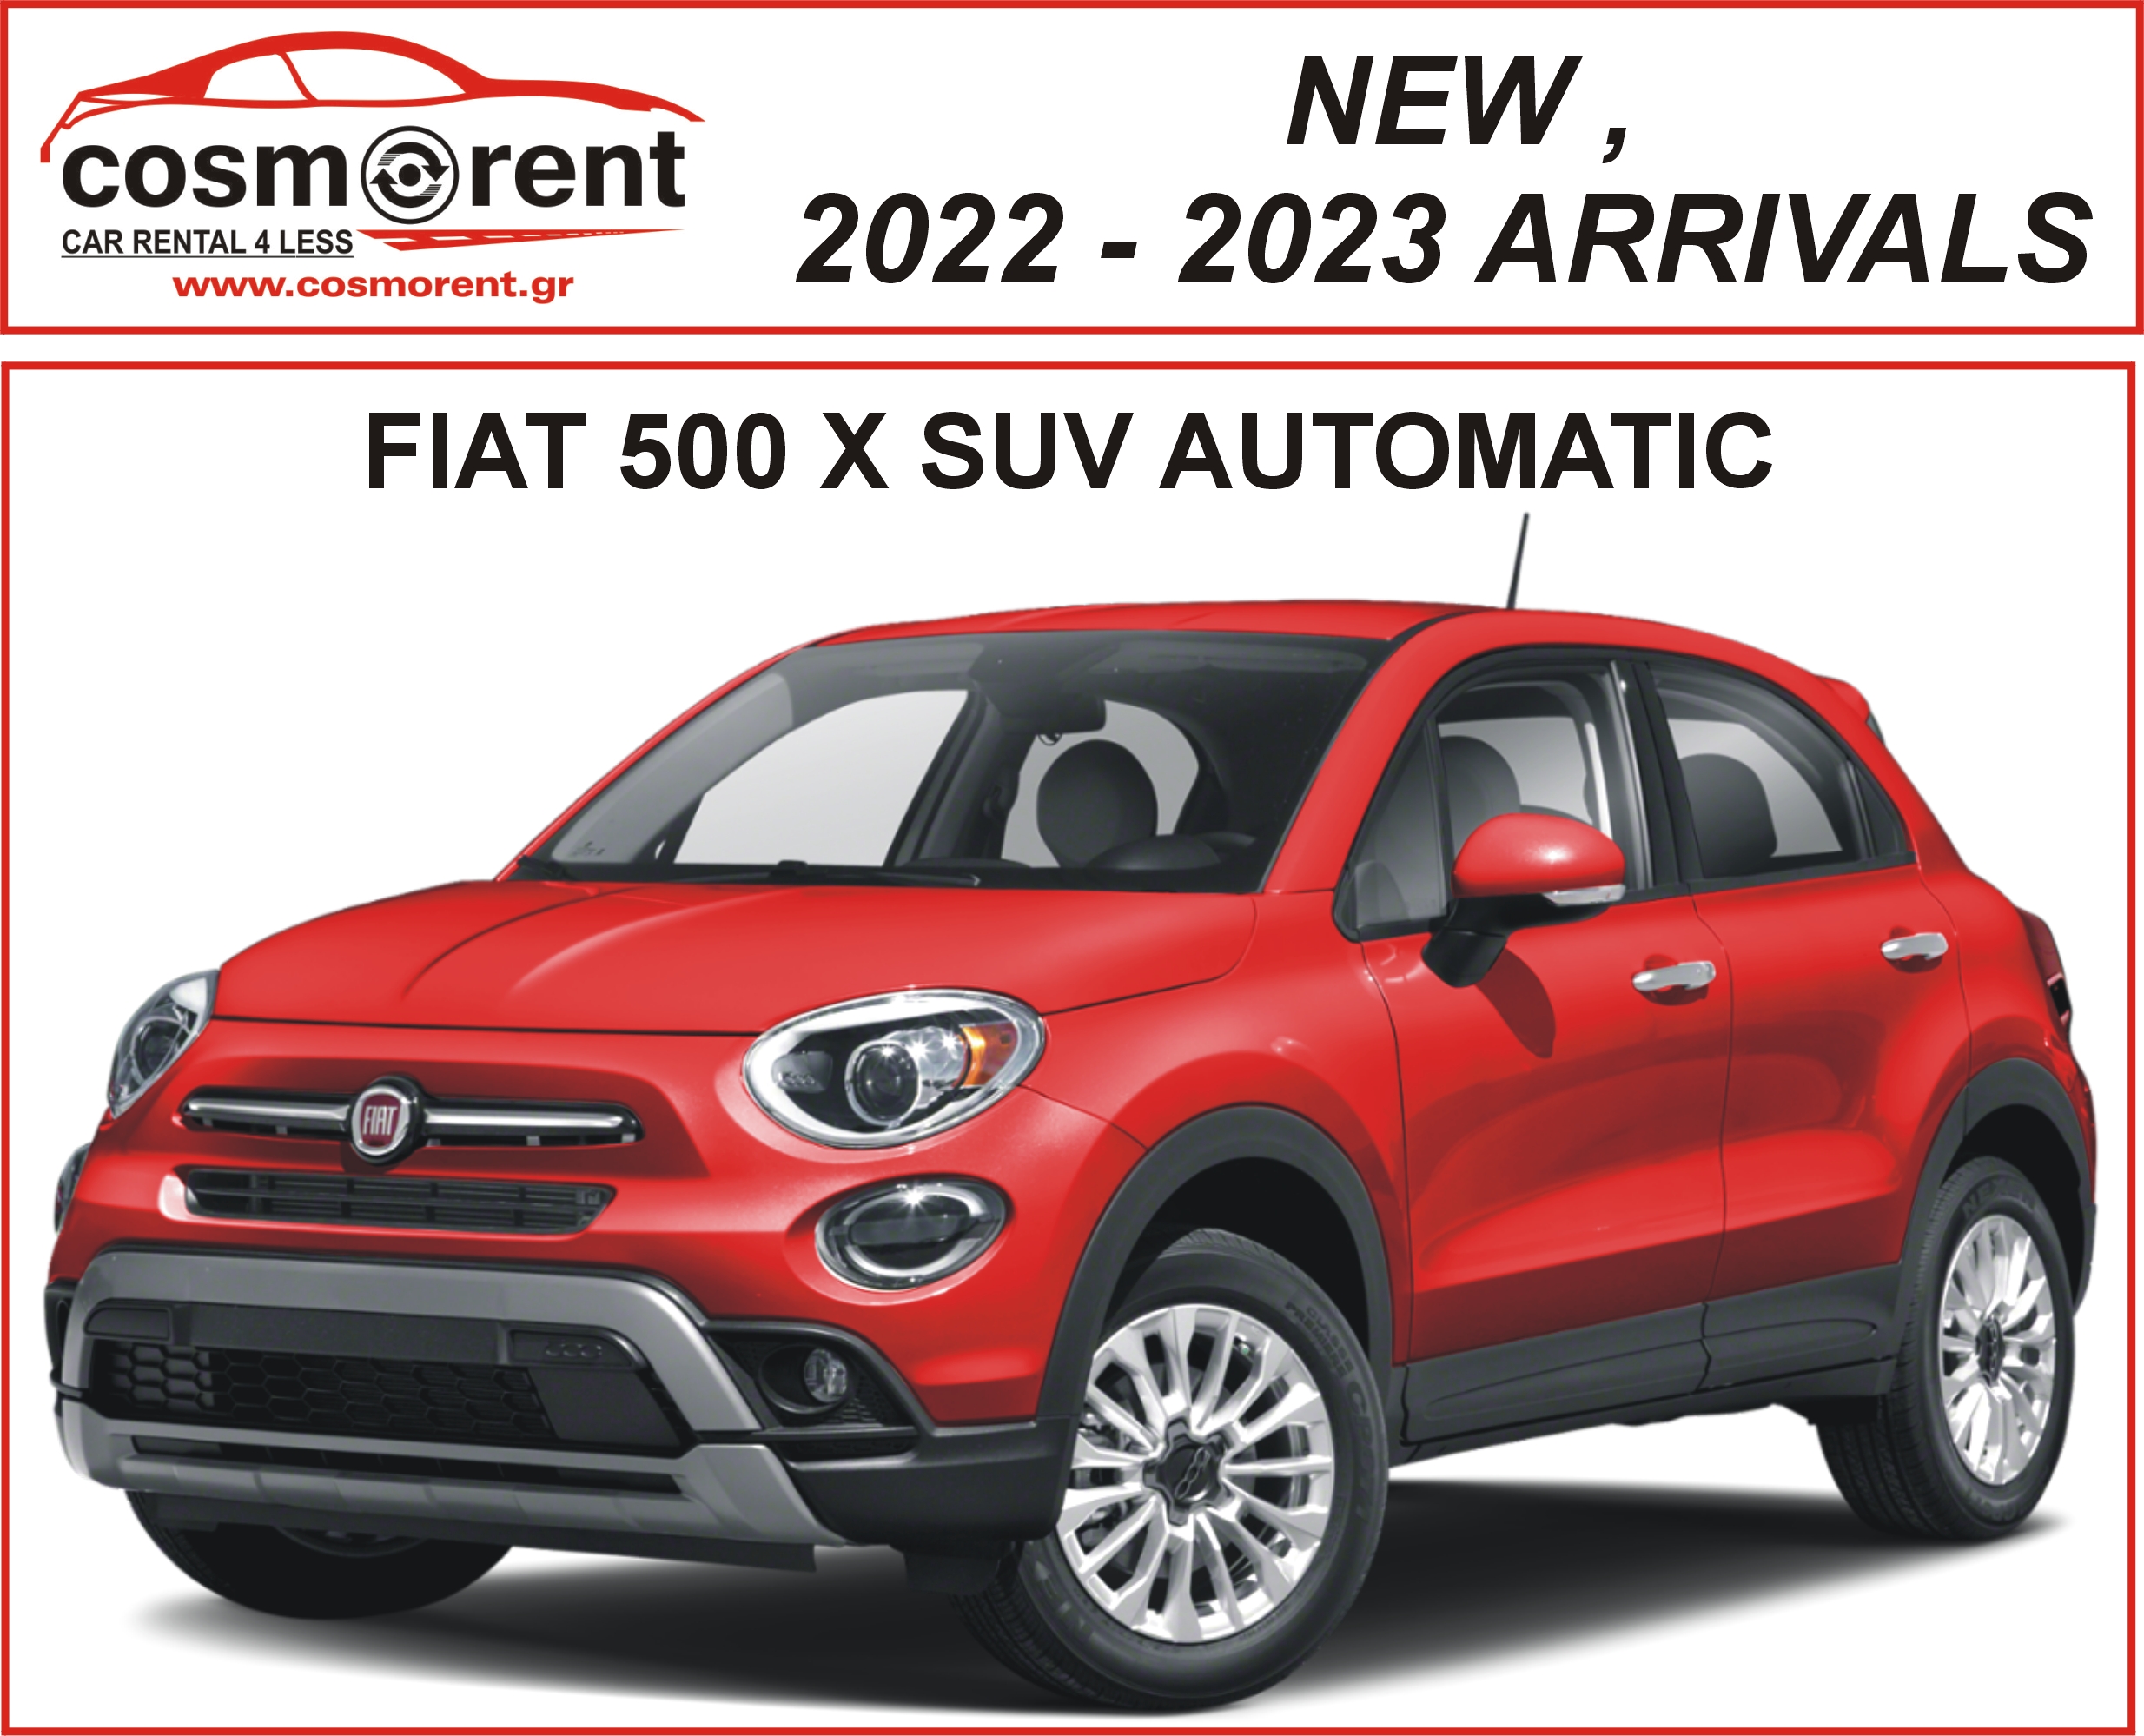 NEW 2022 – 2023 FIAT 500 X FAMILY SUV AUTOMATIC